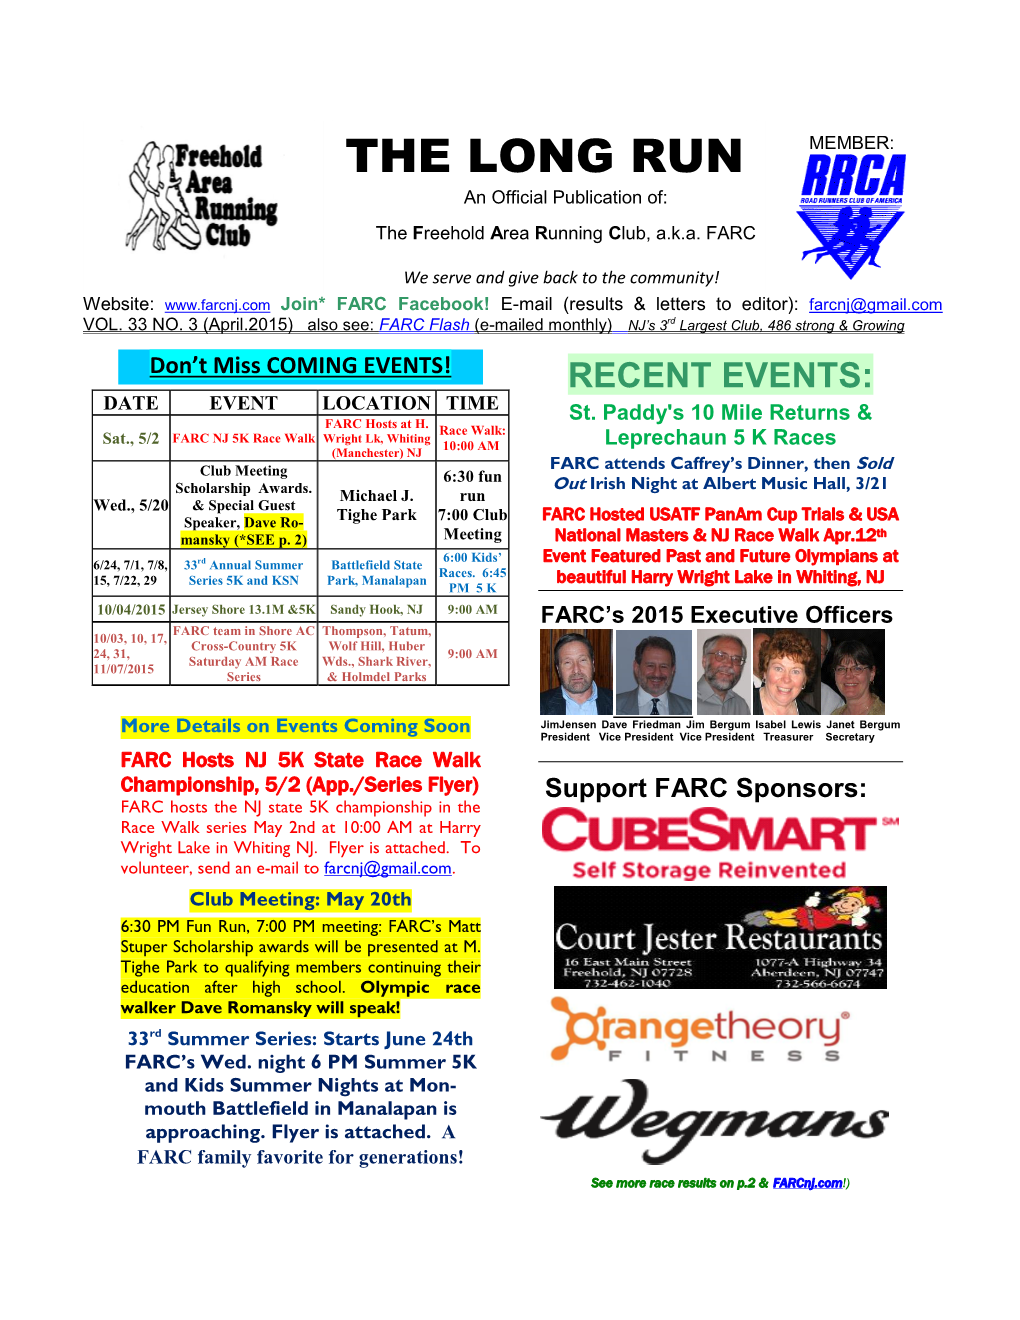 THE LONG RUN MEMBER: an Official Publication Of: the Freehold Area Running Club, A.K.A